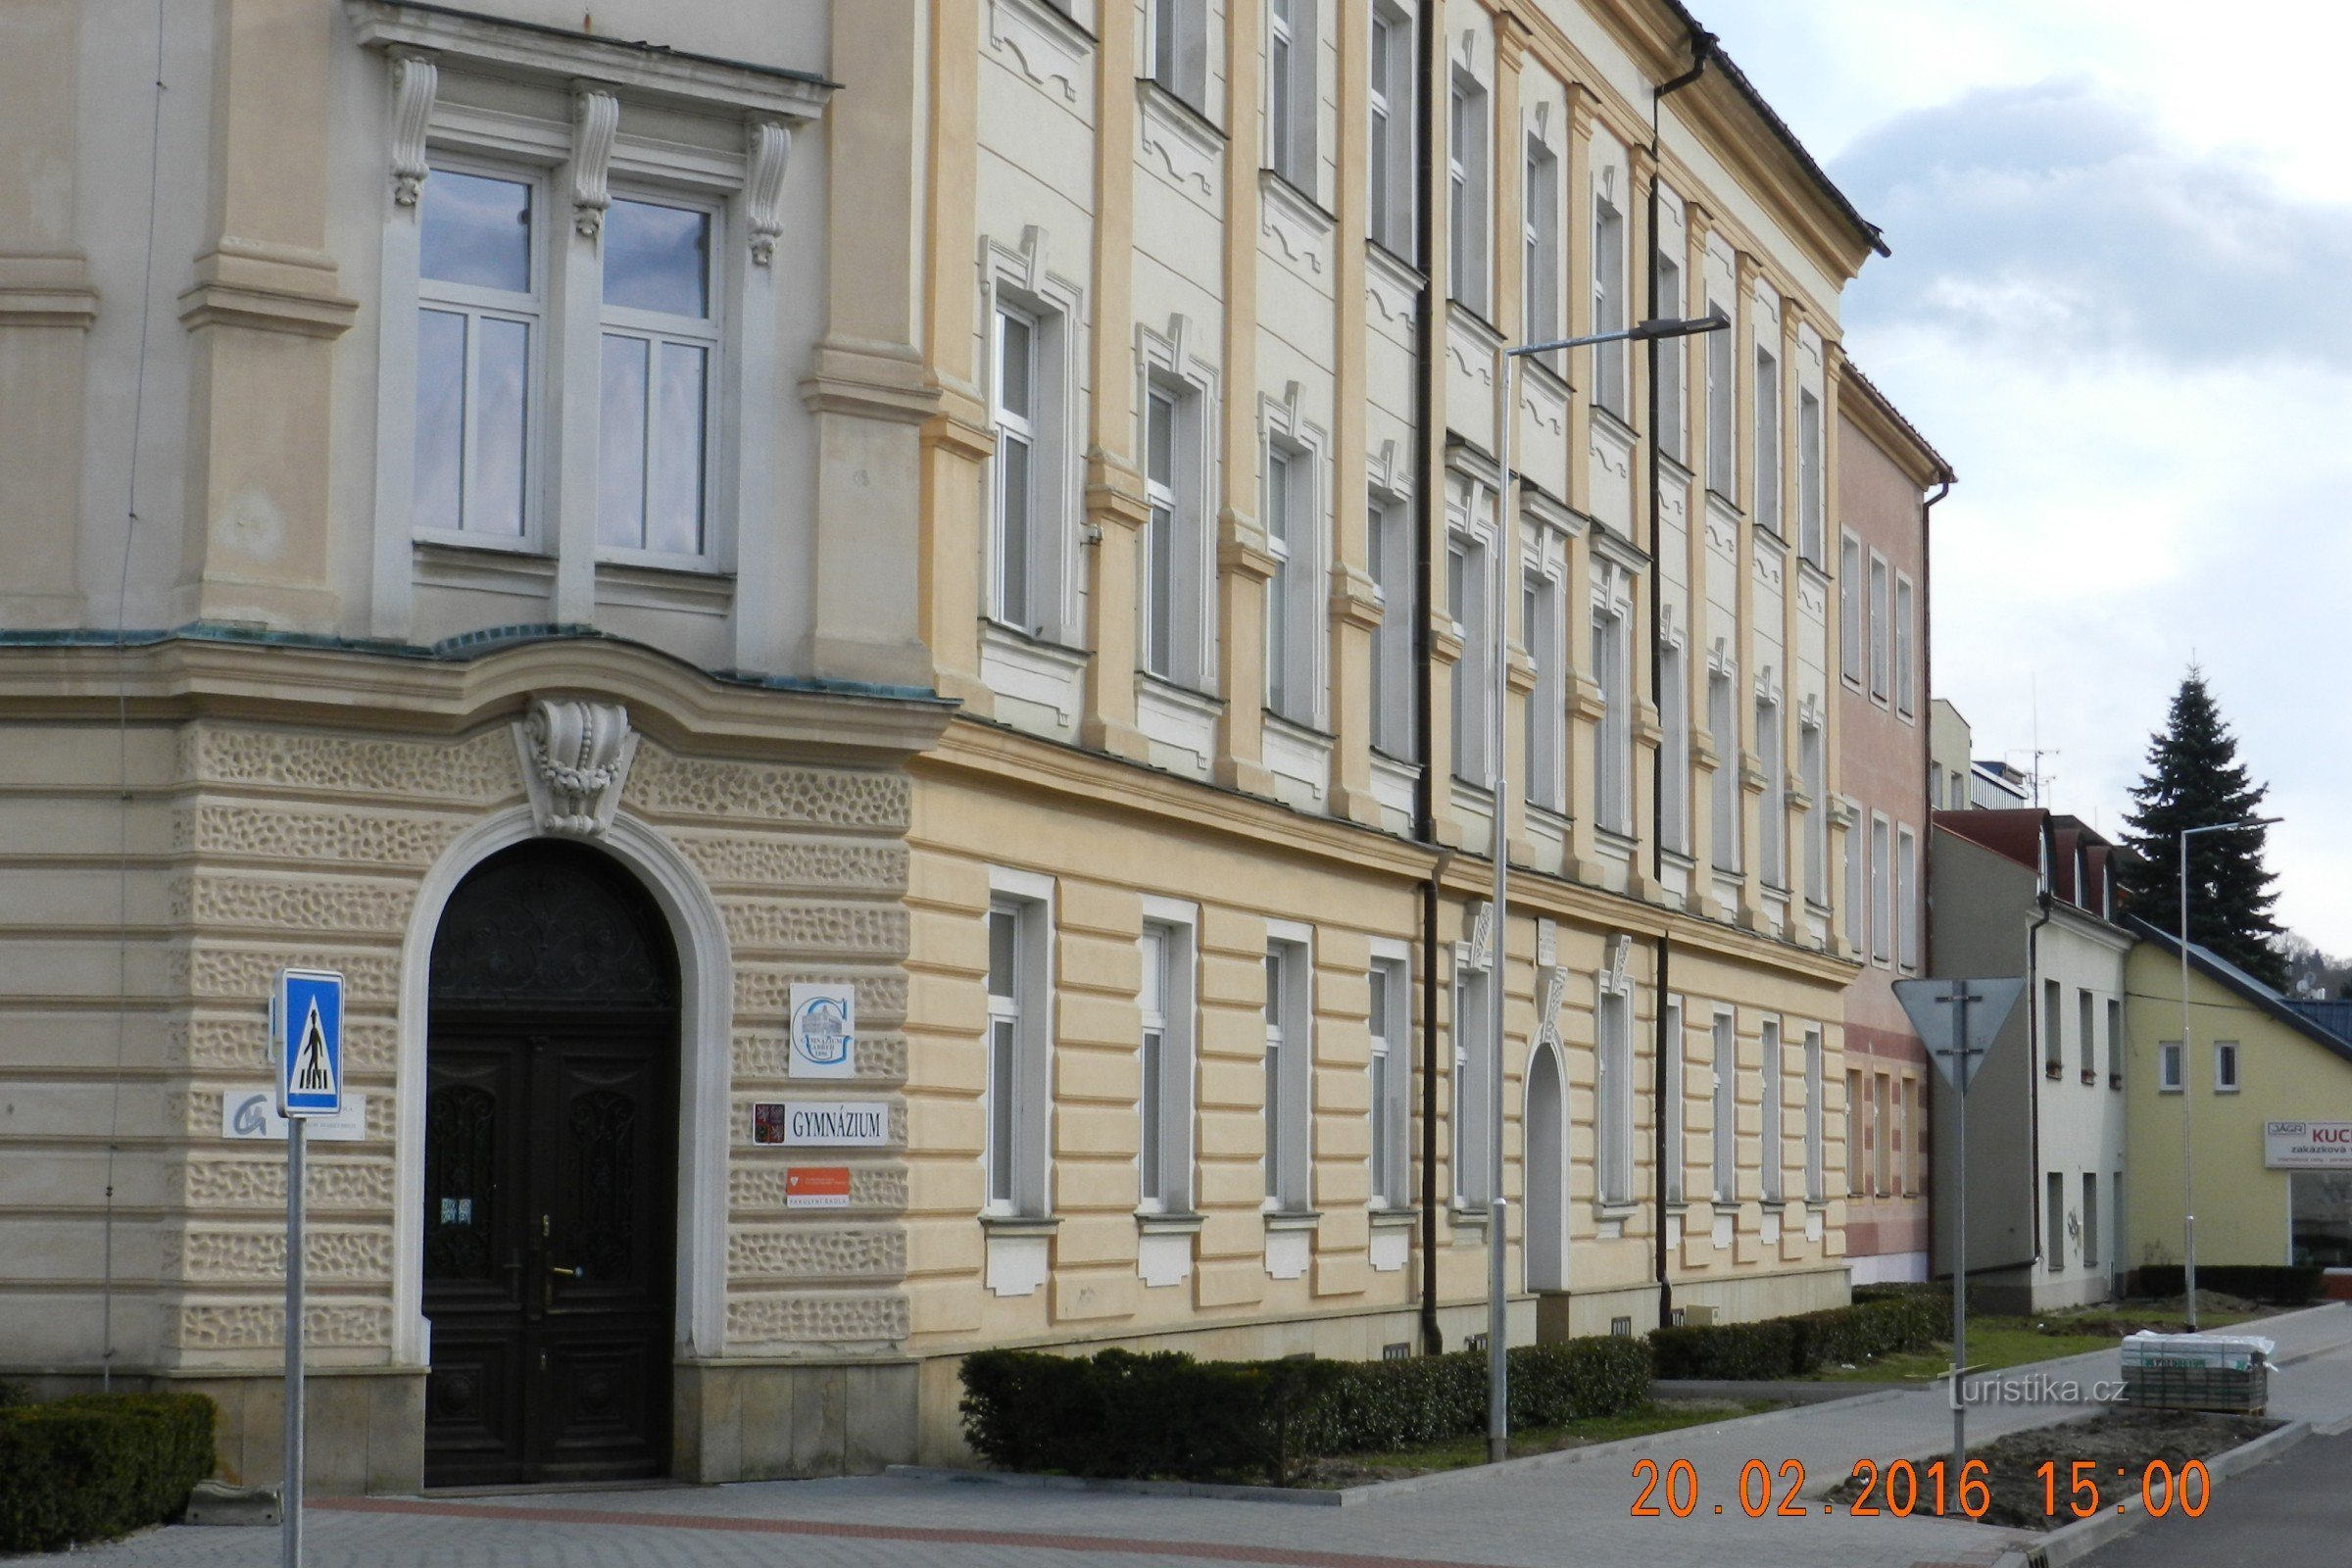 Zábřeh - gymnasium building - the first and oldest secondary school in Northwest Moravia